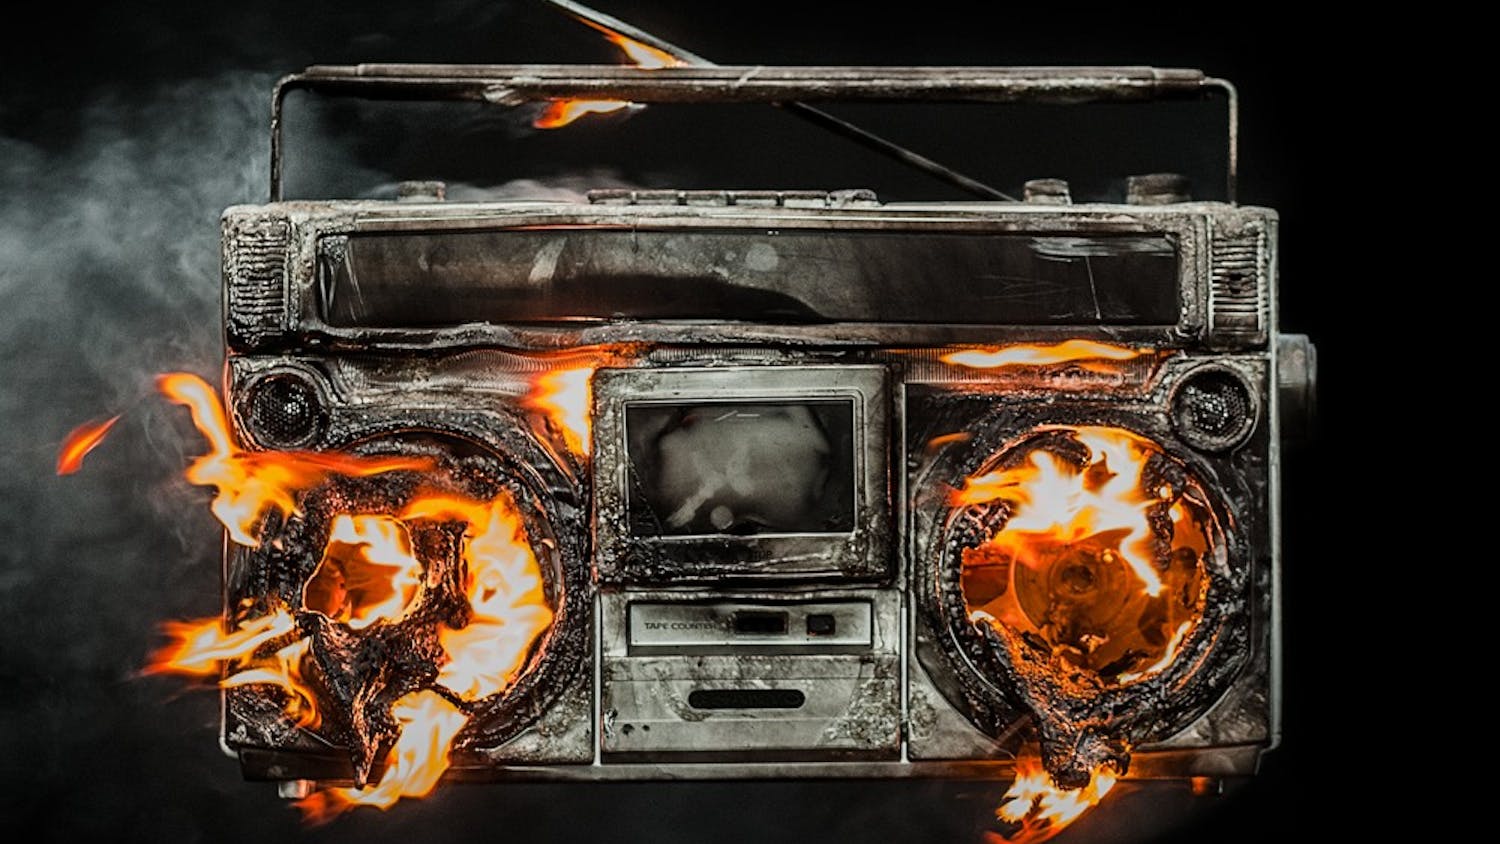 Green Day's newest album, "Revolution Radio" discusses disheartening themes like death, suicide and the misery of life.&nbsp;